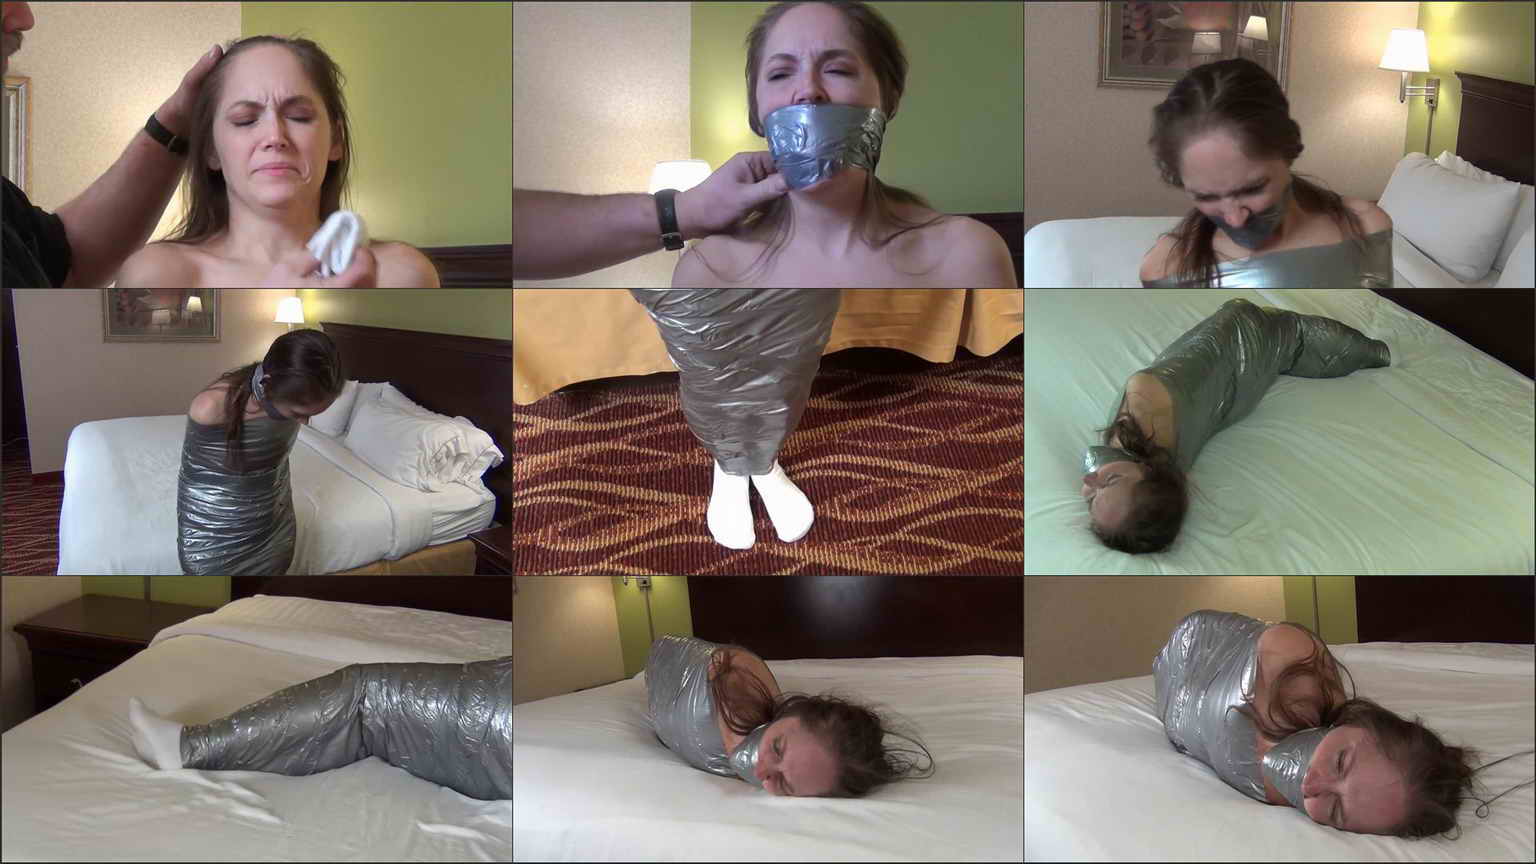 Code M. reccomend teen girl duct taped saran wrapped nude